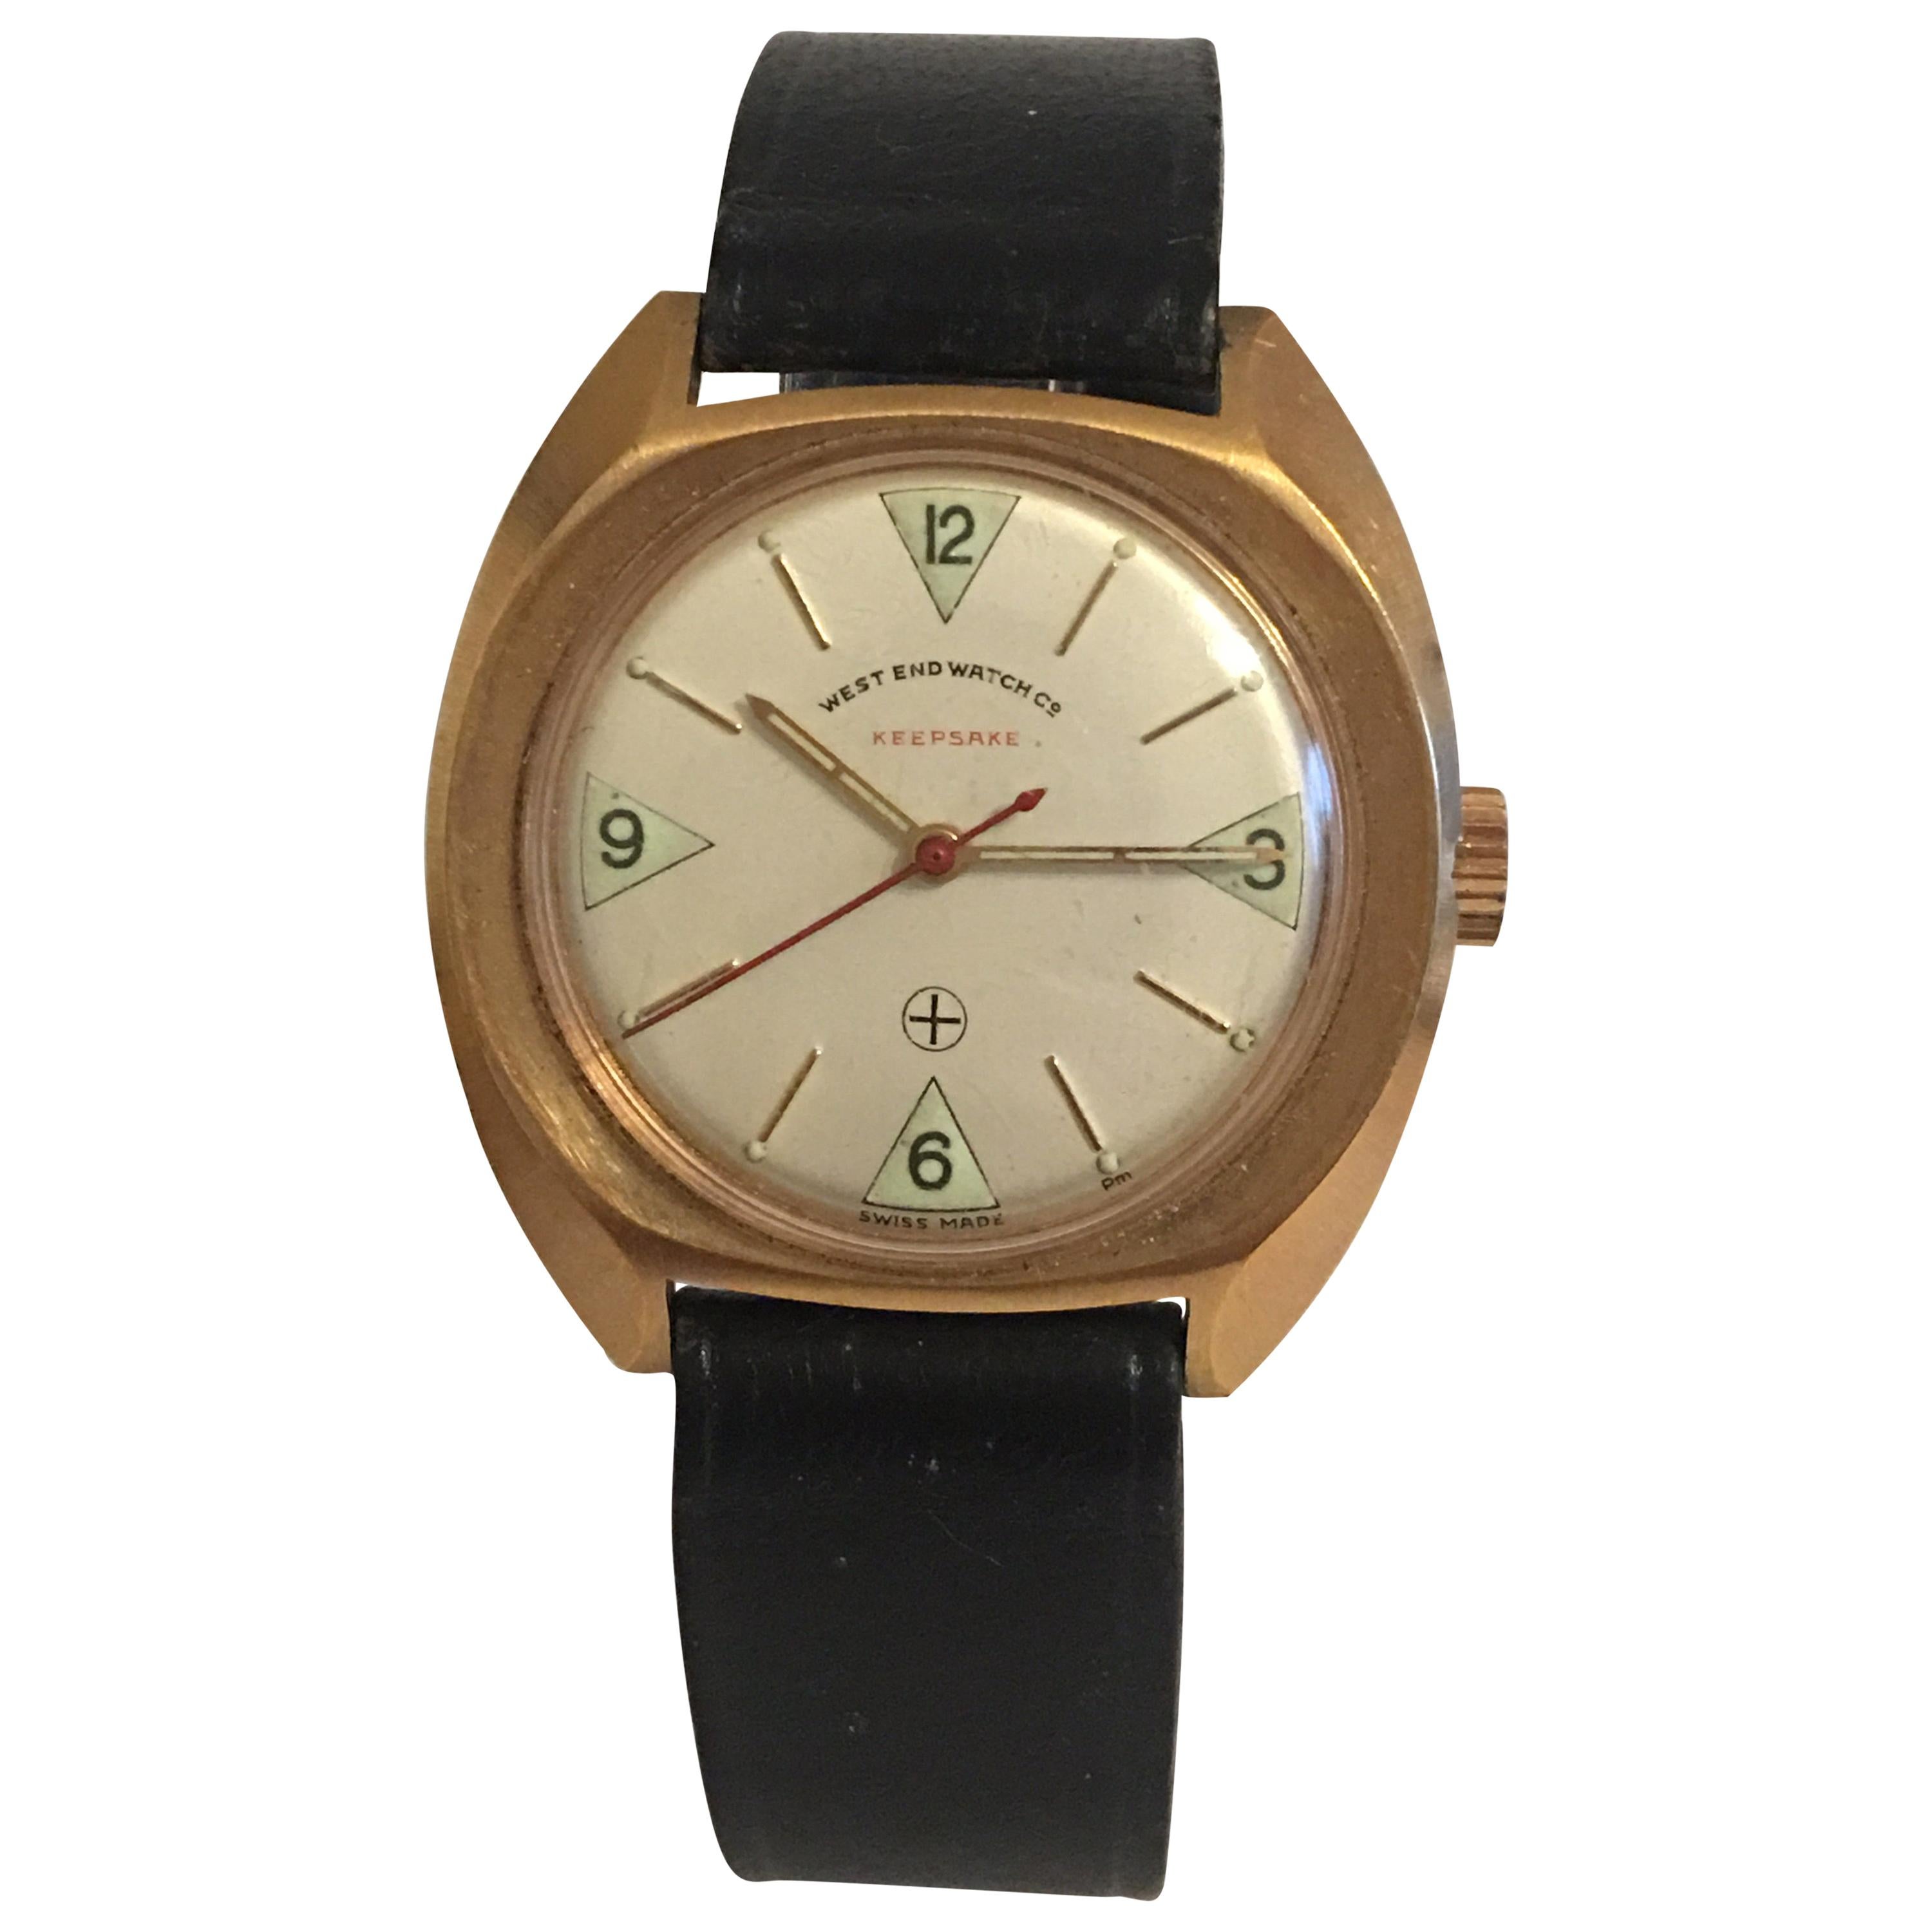 Vintage Gold-Plated 1970s West End Watch Co. with Swift Seconds